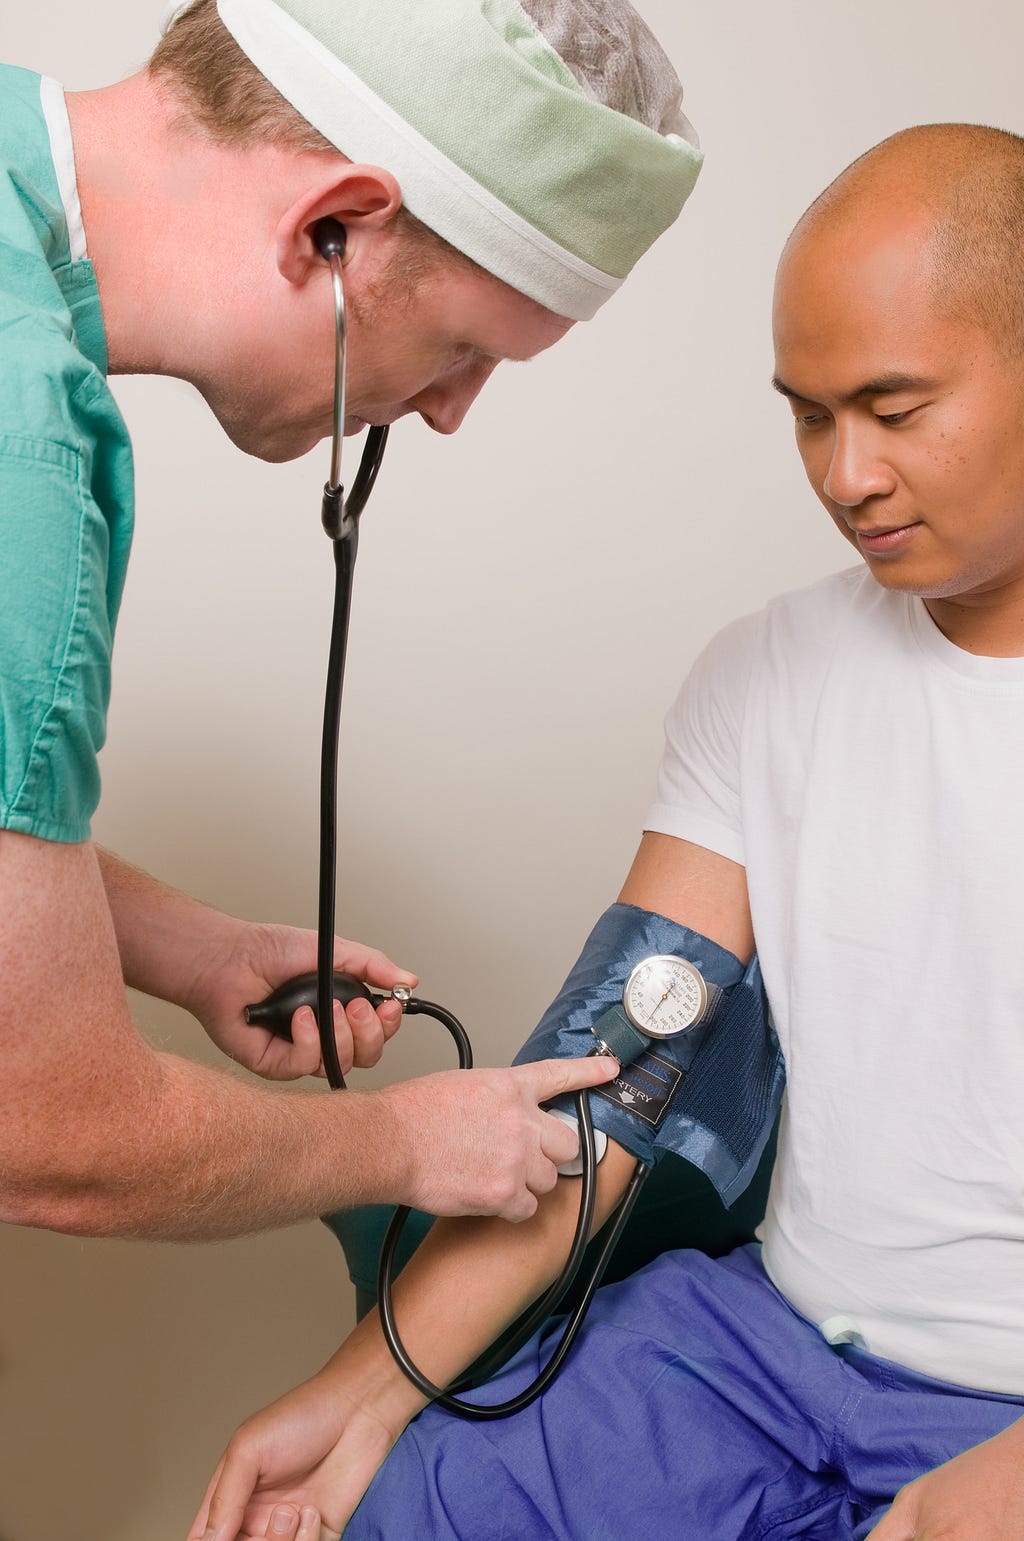 A white male checking an Asian’s blood pressure